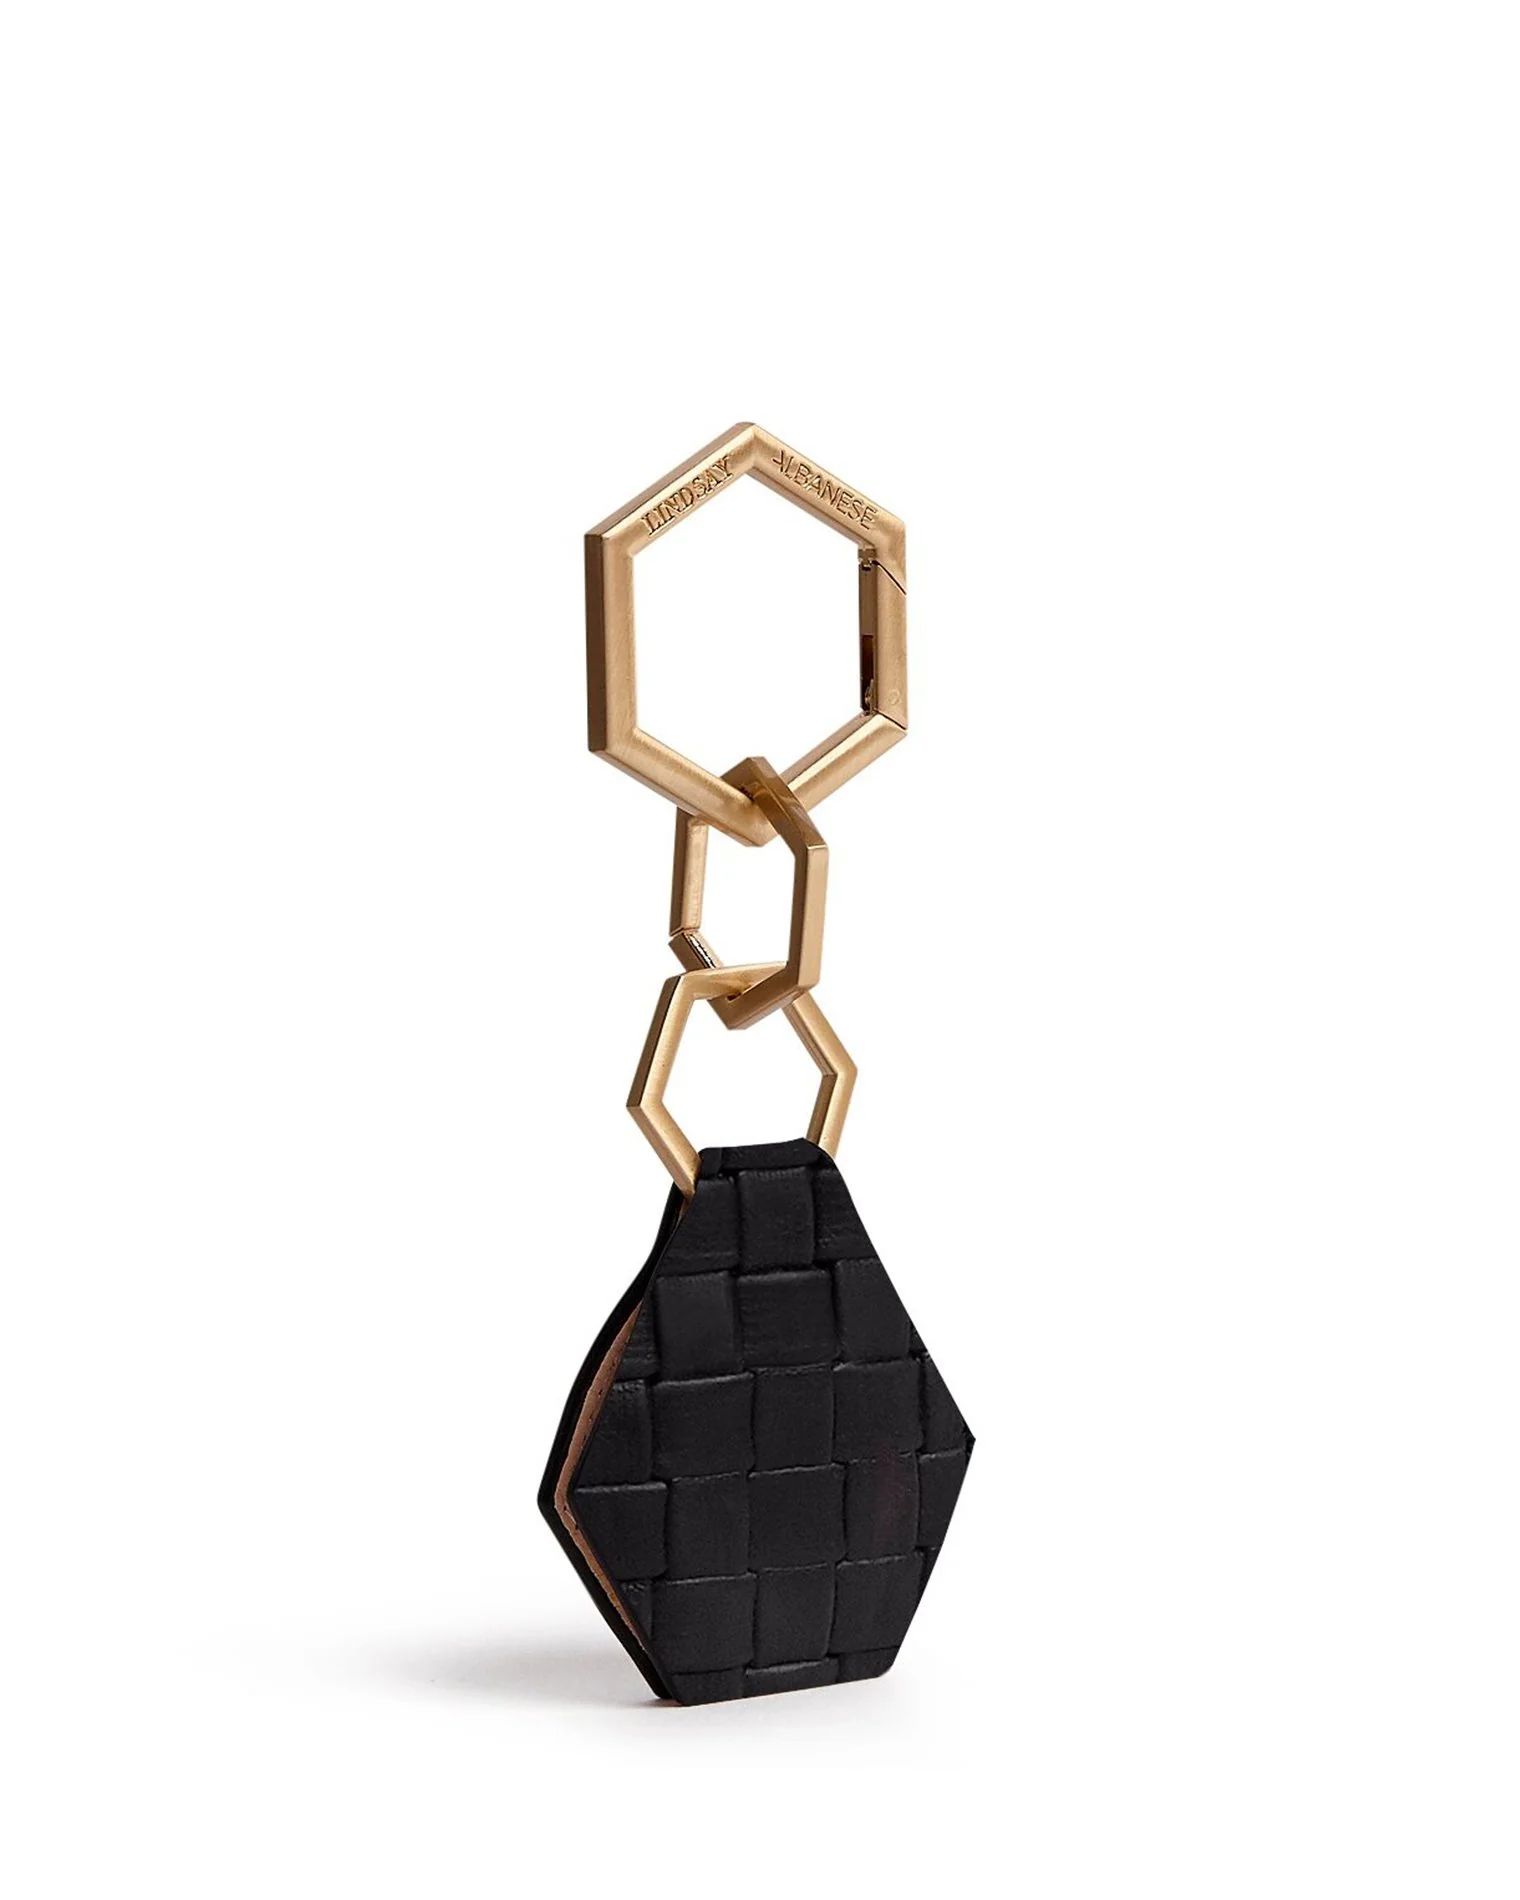 toptote hex hat holder by lindsay albanese | L*Space